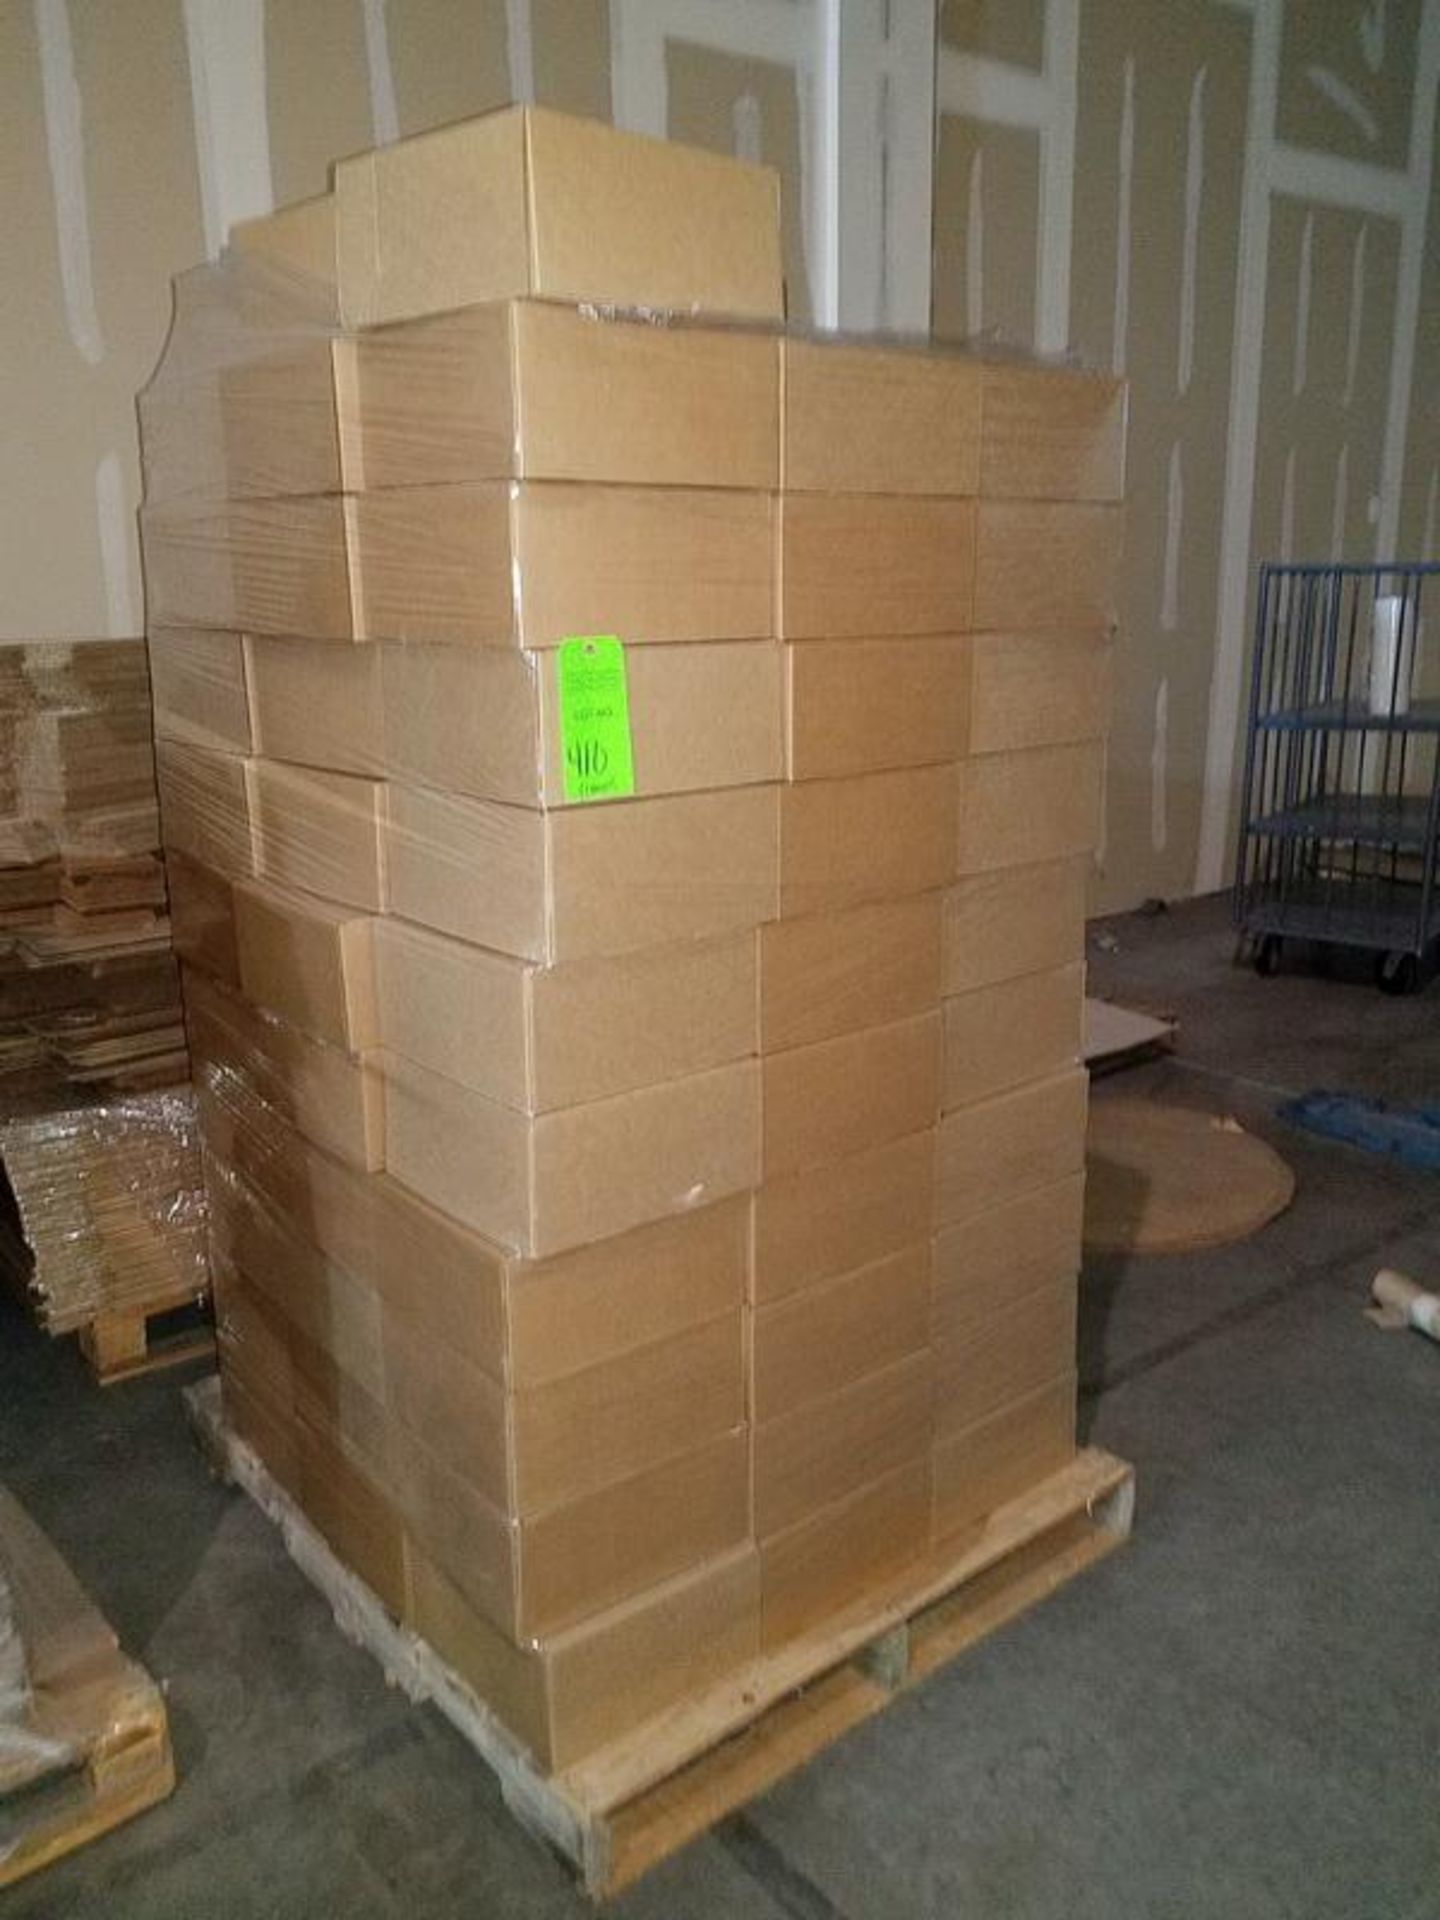 Lot of (95) Corrugated Boxes, Approx. 12.5" x 13" x 6"